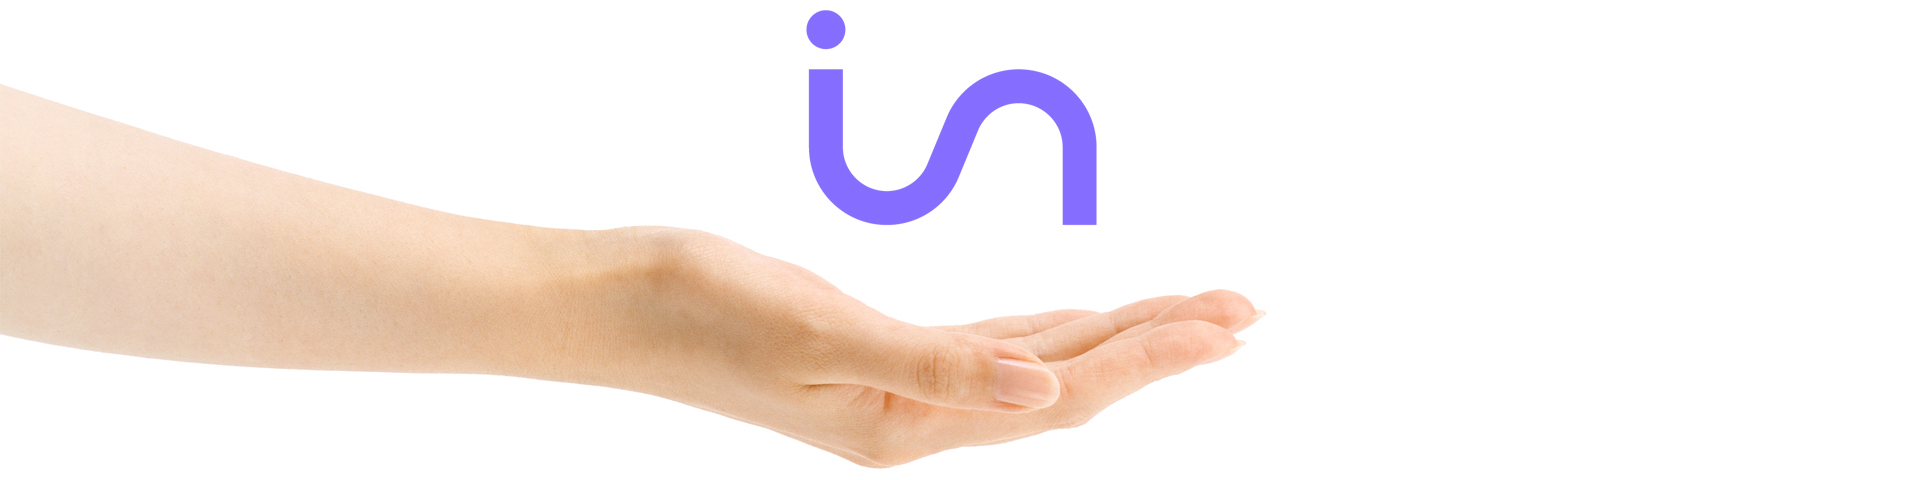 The photo shows the insidevision logo above a hand